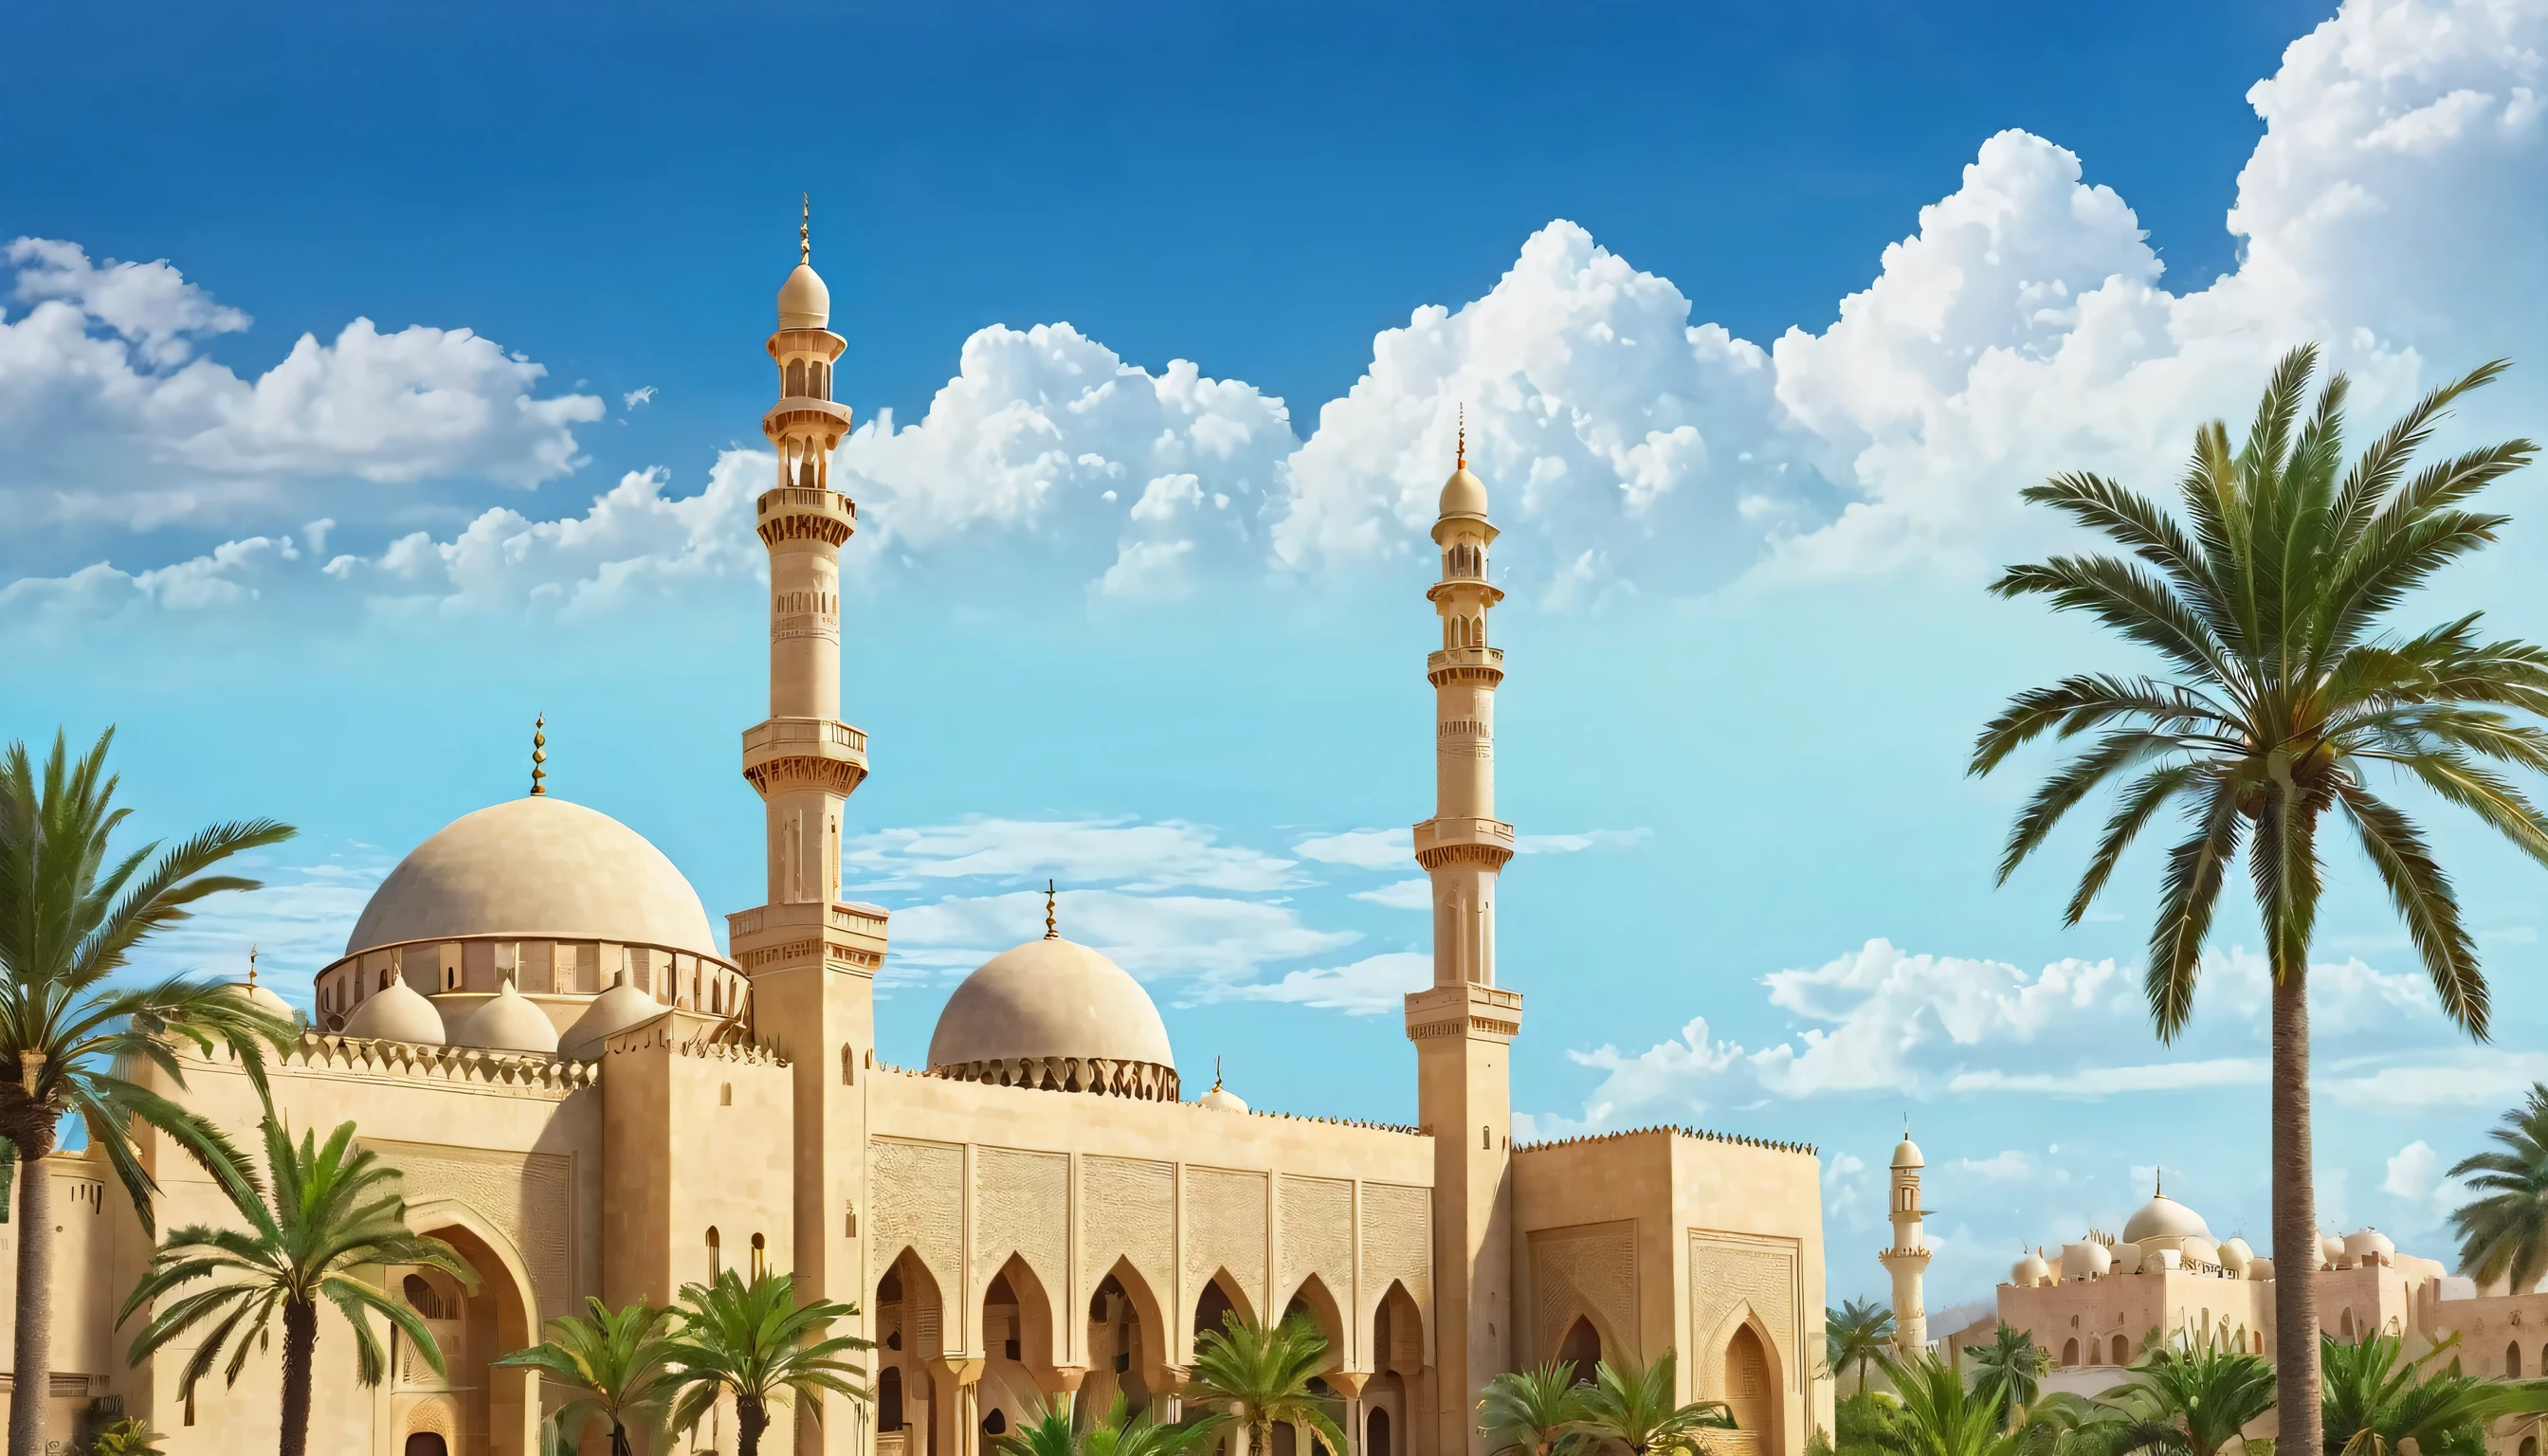 Arabian buildings with mosque and palm trees, set against a cloudy sky, outdoor palm trees surrounding the historic site, scenery, sky, tree, cloud, palm_tree, outdoors, building, day, city, fantasy, arch, cloudy_sky, blue_sky